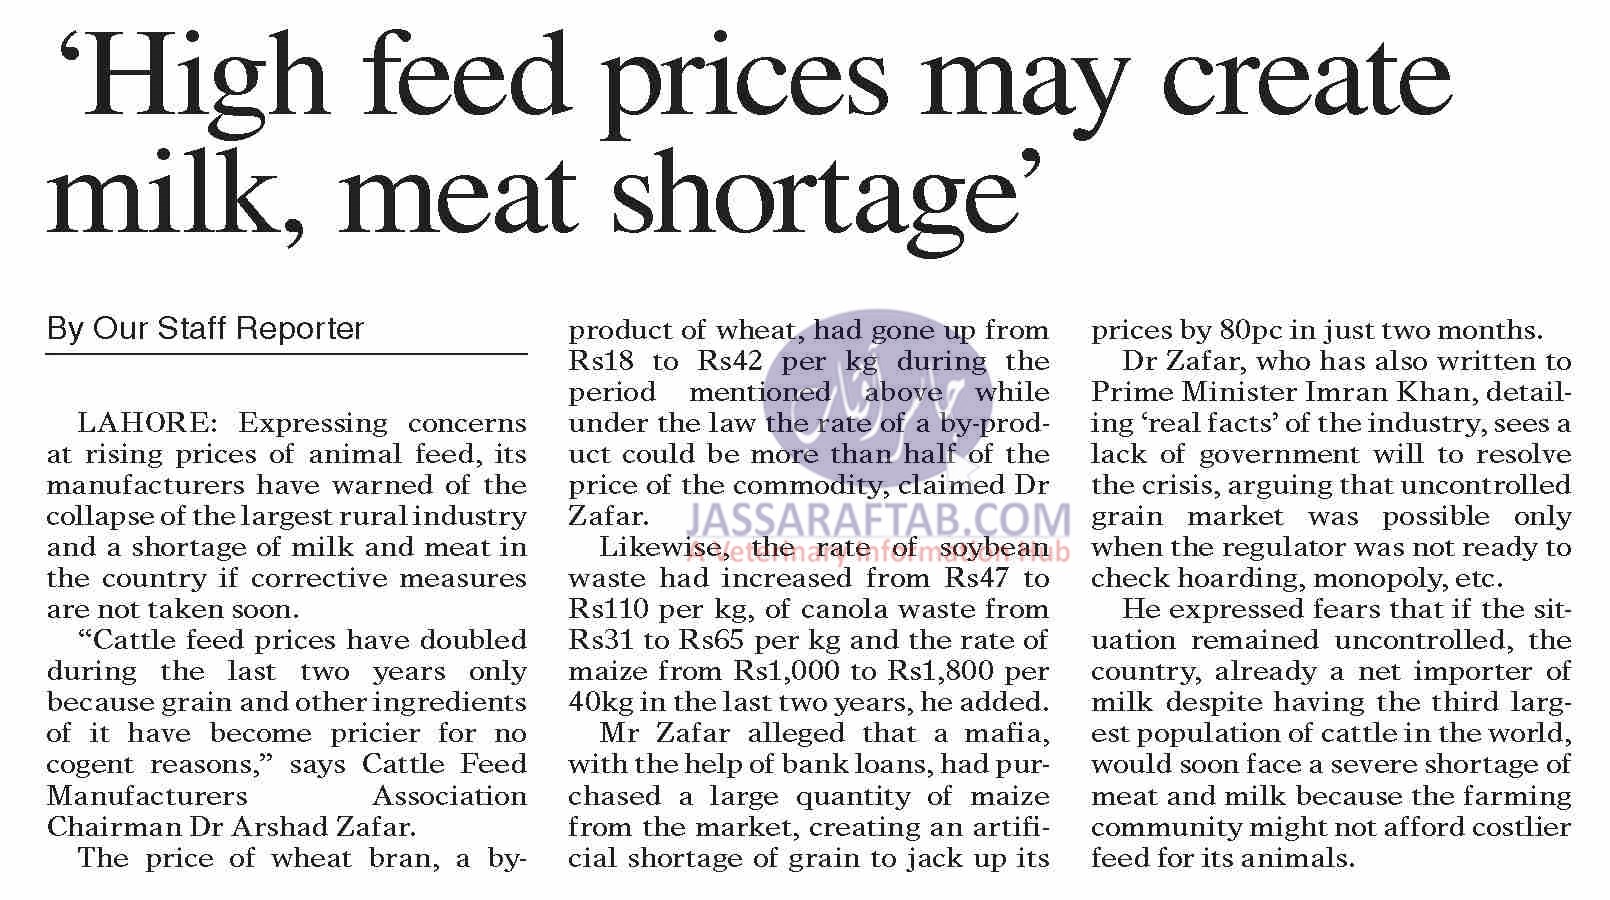 High feed prices my create milk and meat shortage